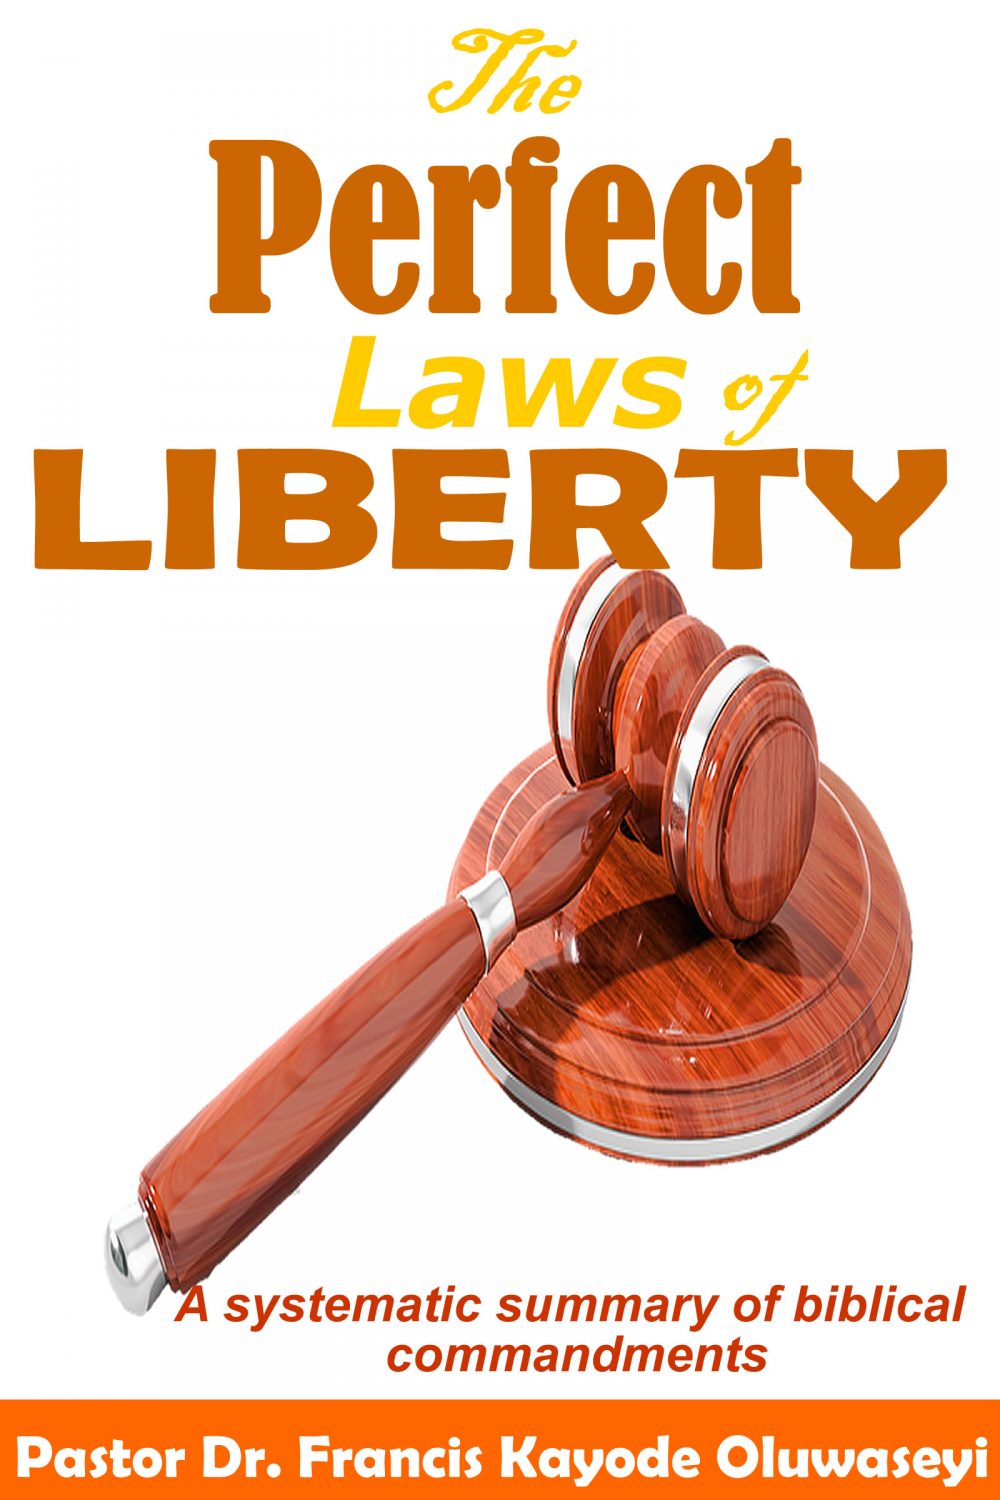 Law of liberty